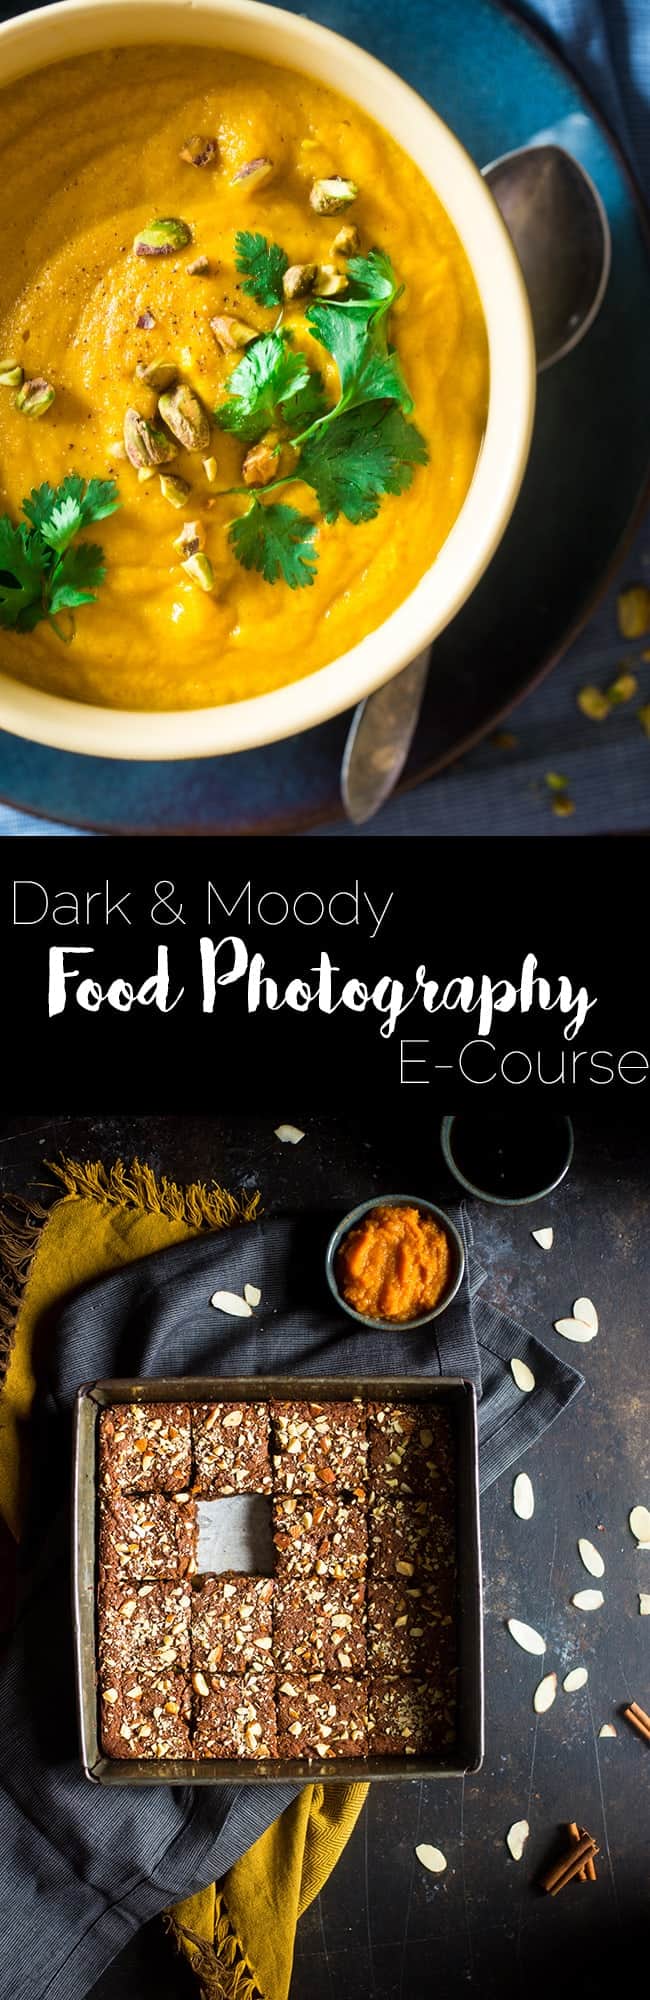 Dark and Moody Food Photography E-Course - Learn how to take gorgeous, moody food photos with this awesome, easy-to-follow e-course! | Foodfaithfitness.com | @FoodFaithFit